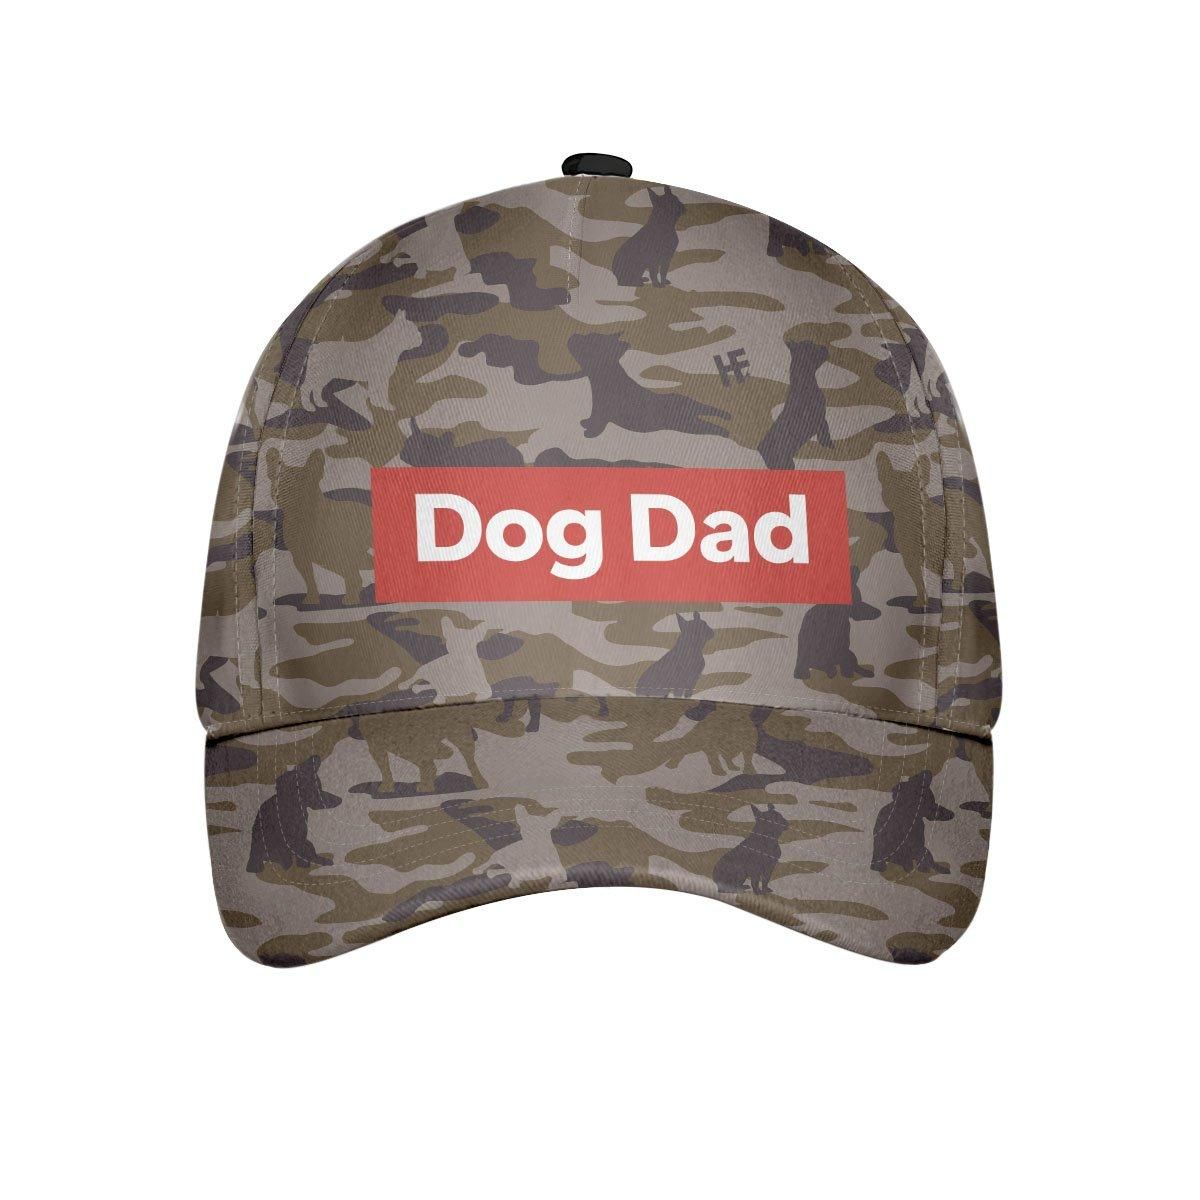 Dog Dad French Bulldogs Camouflage Cap